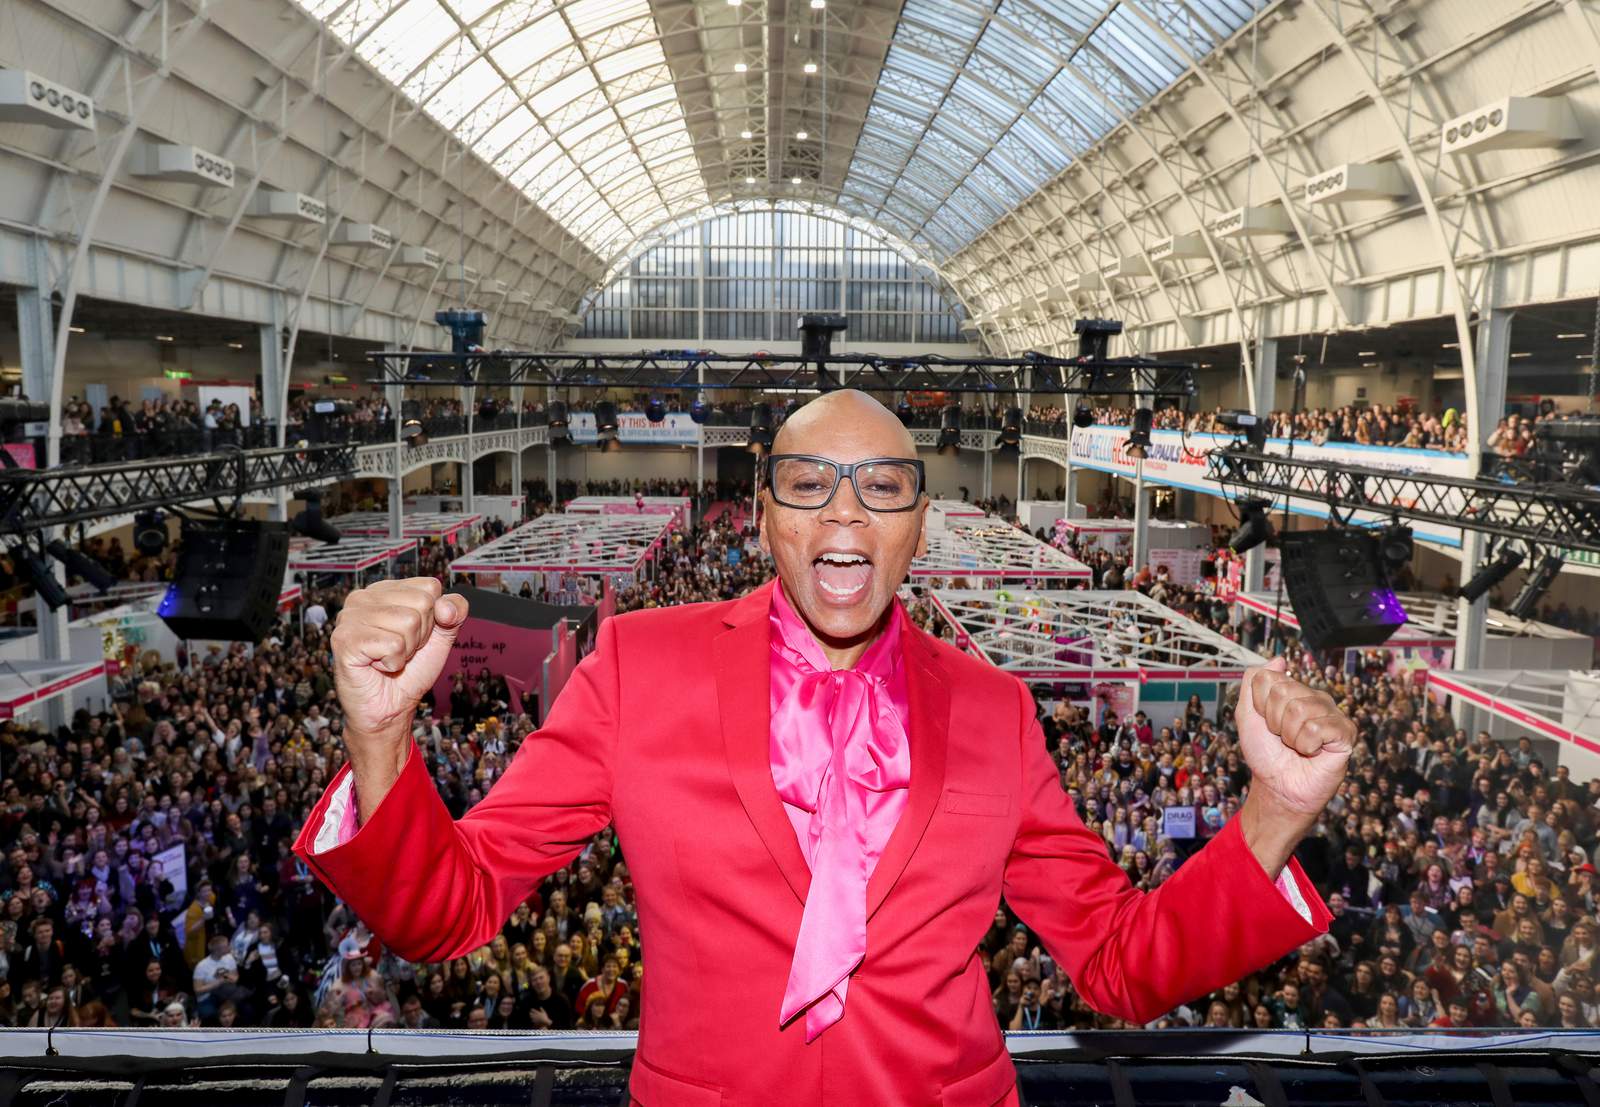 RuPaul built a drag empire -- now it’s time to pay attention